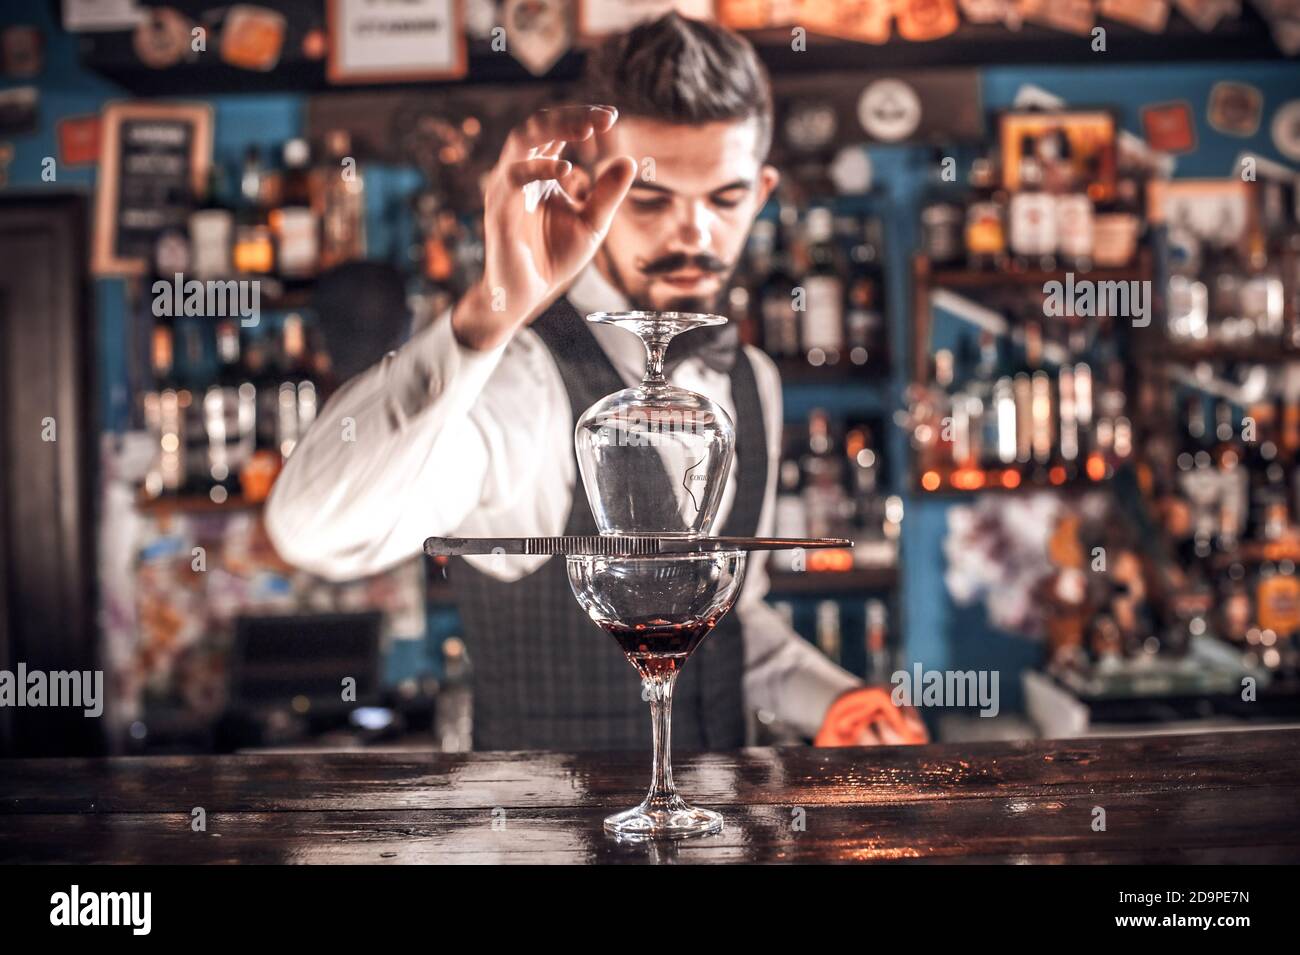 Charismatic Female bartender is pouring a drink in the nightclub Stock  Photo - Alamy